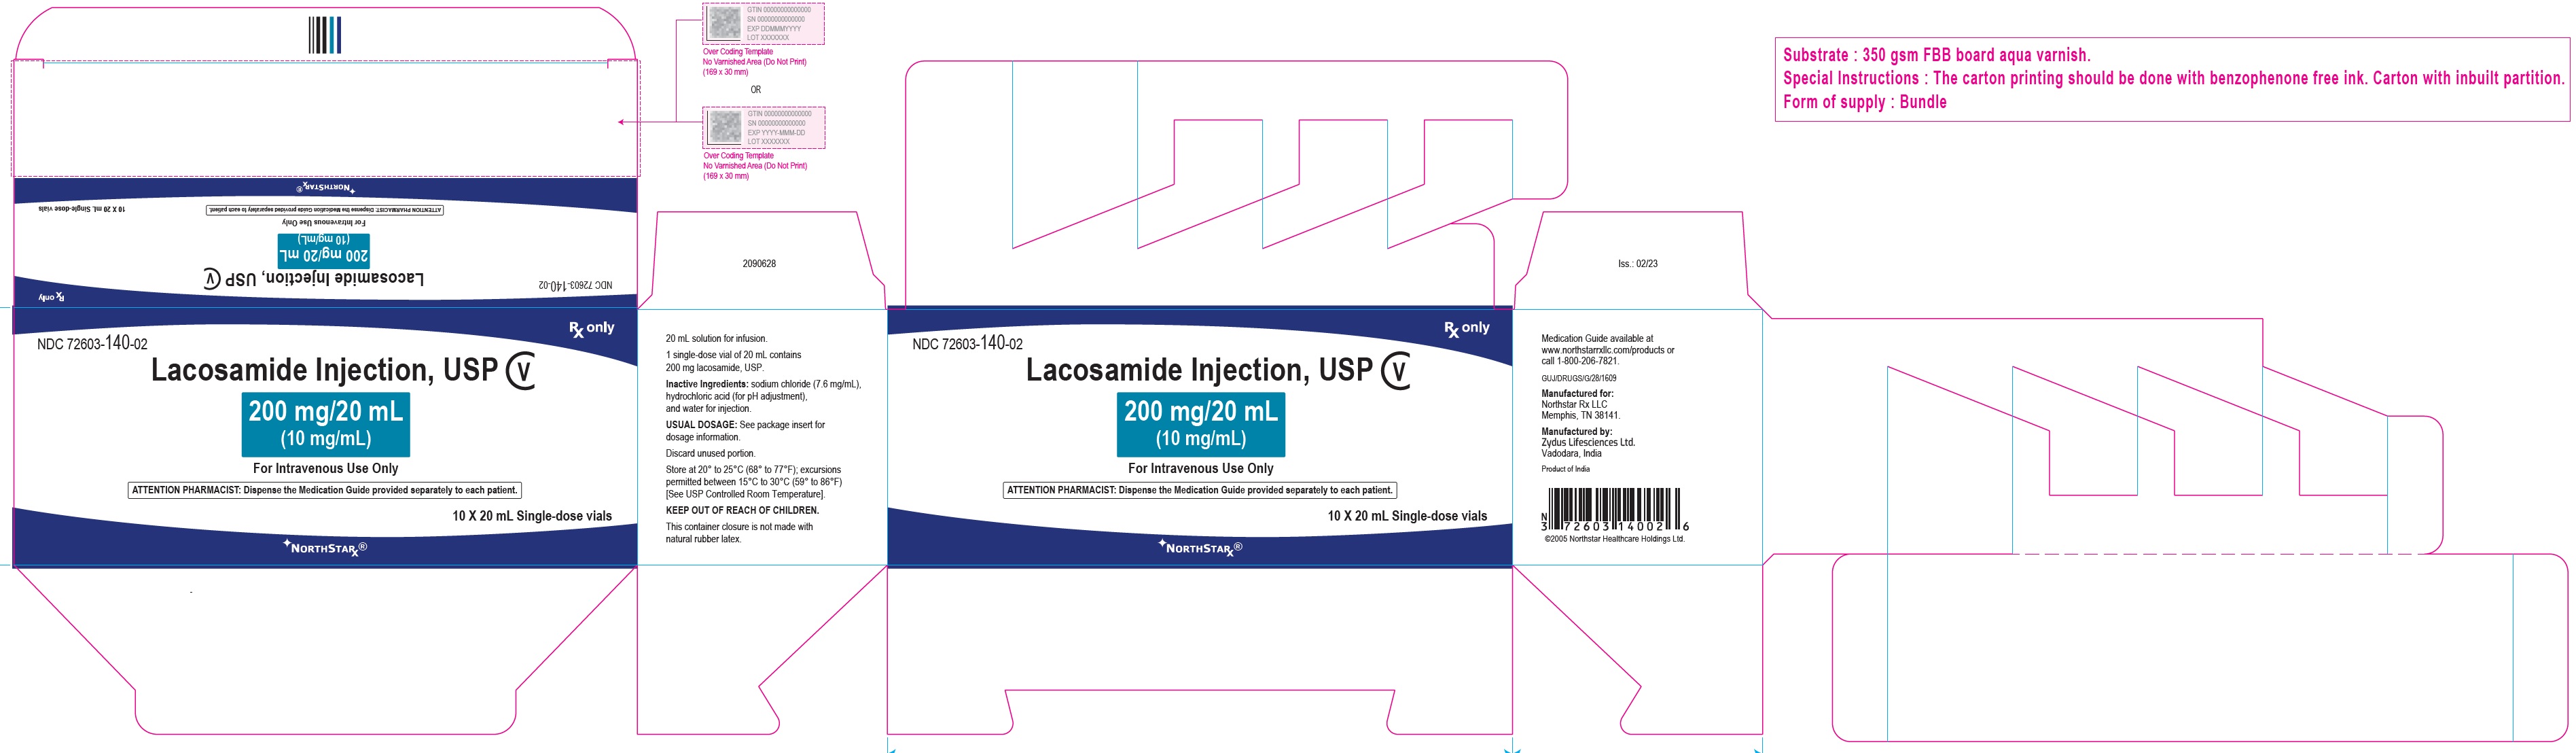 Lacosamide Injection